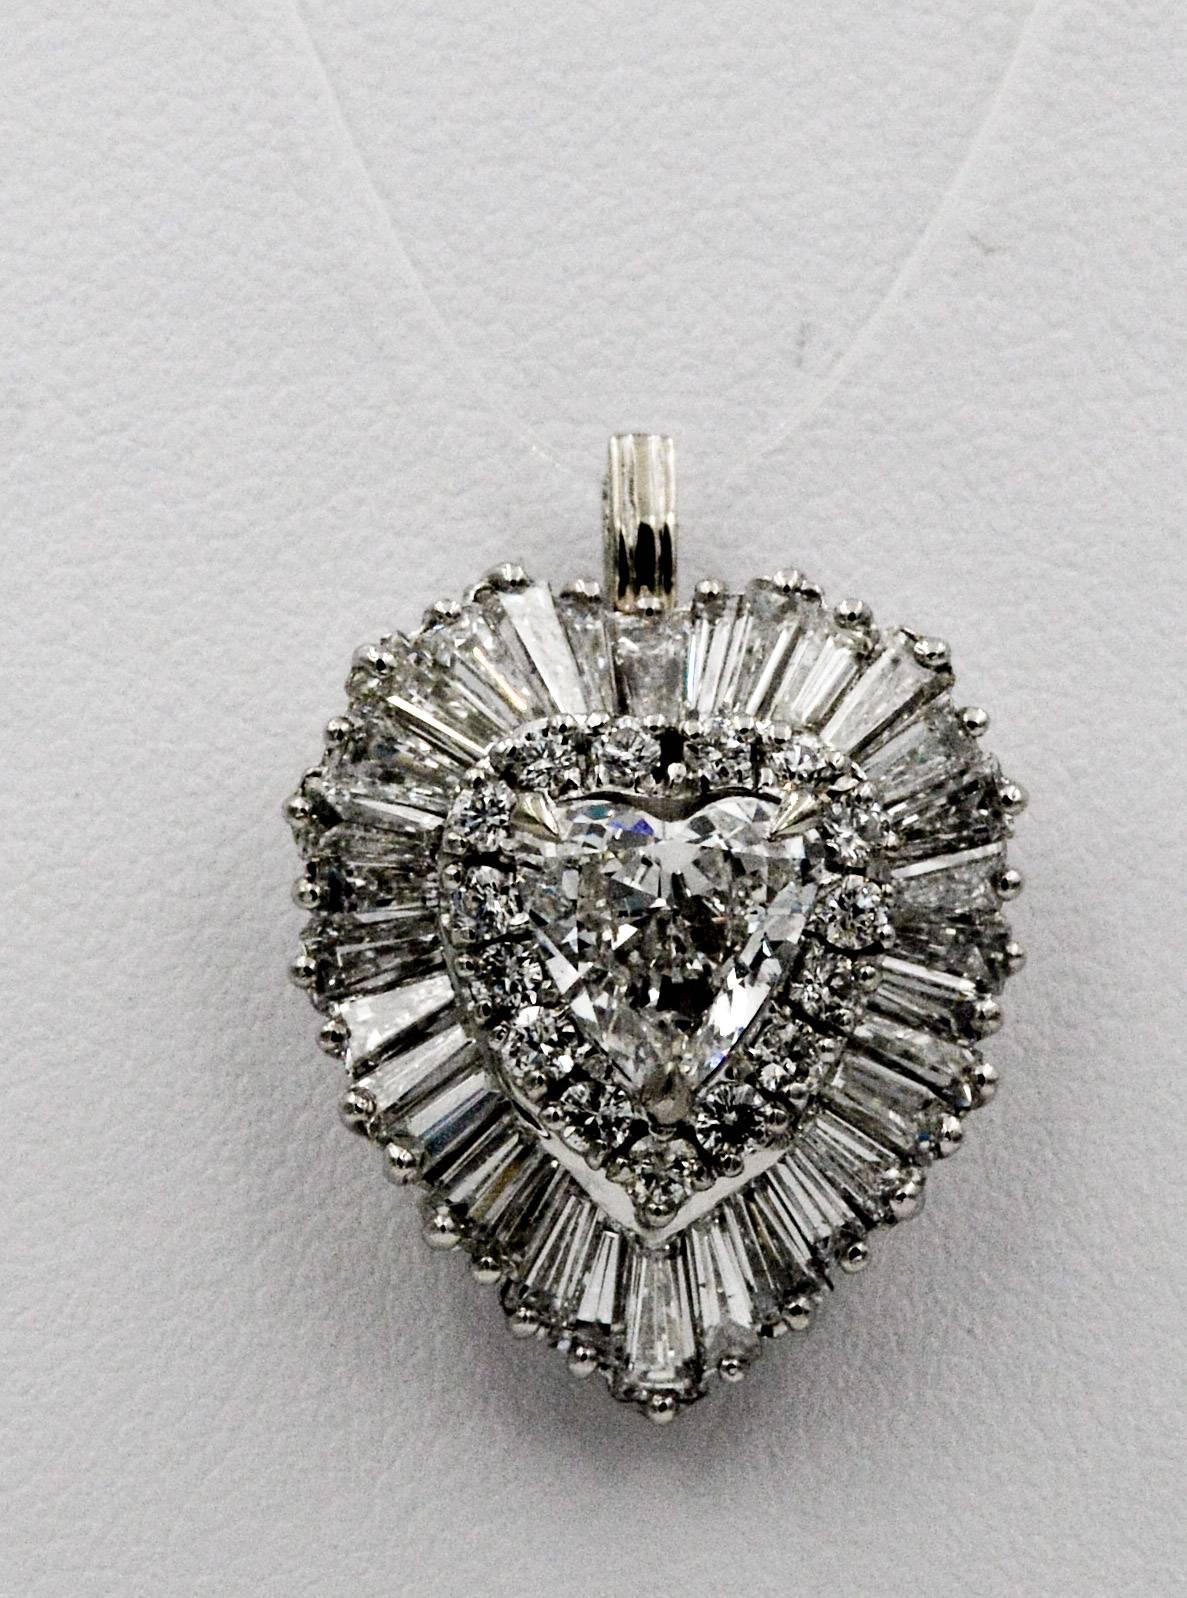 This beuatful ring pendant designed by Ring-Dant is executed in an elegant classic 1970's ballerina style centered with a heart shaped brilliant cut diamond that weighs approximately 1.30 carats with H color and SI1 clarity.  This heart diamond is